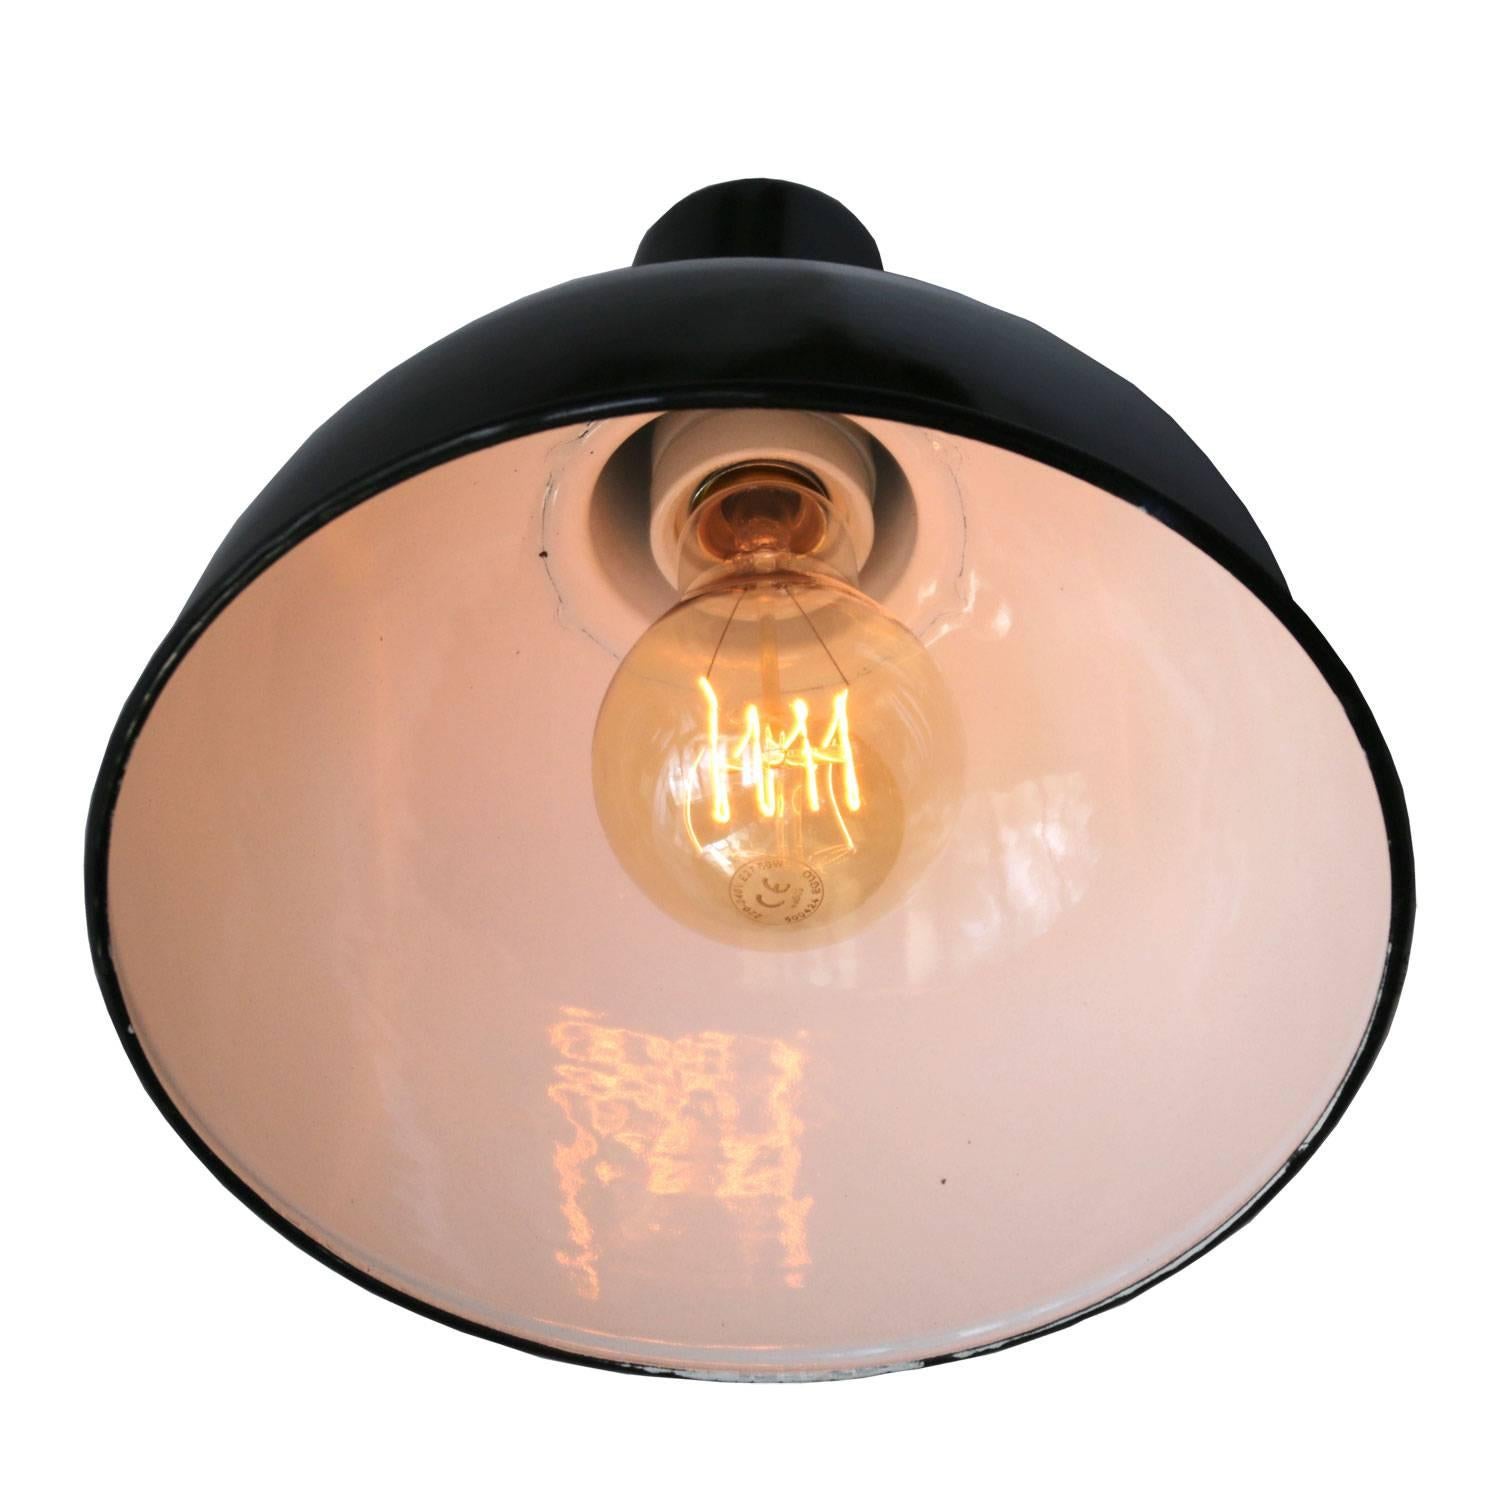 Factory hanging light. Black enamel. White interior.
Brass strain relief with 1.5 meter wire.  

Measure: Weight: 1.0 kg / 2.2 lb

All lamps have been made suitable by international standards for incandescent light bulbs, energy-efficient and LED